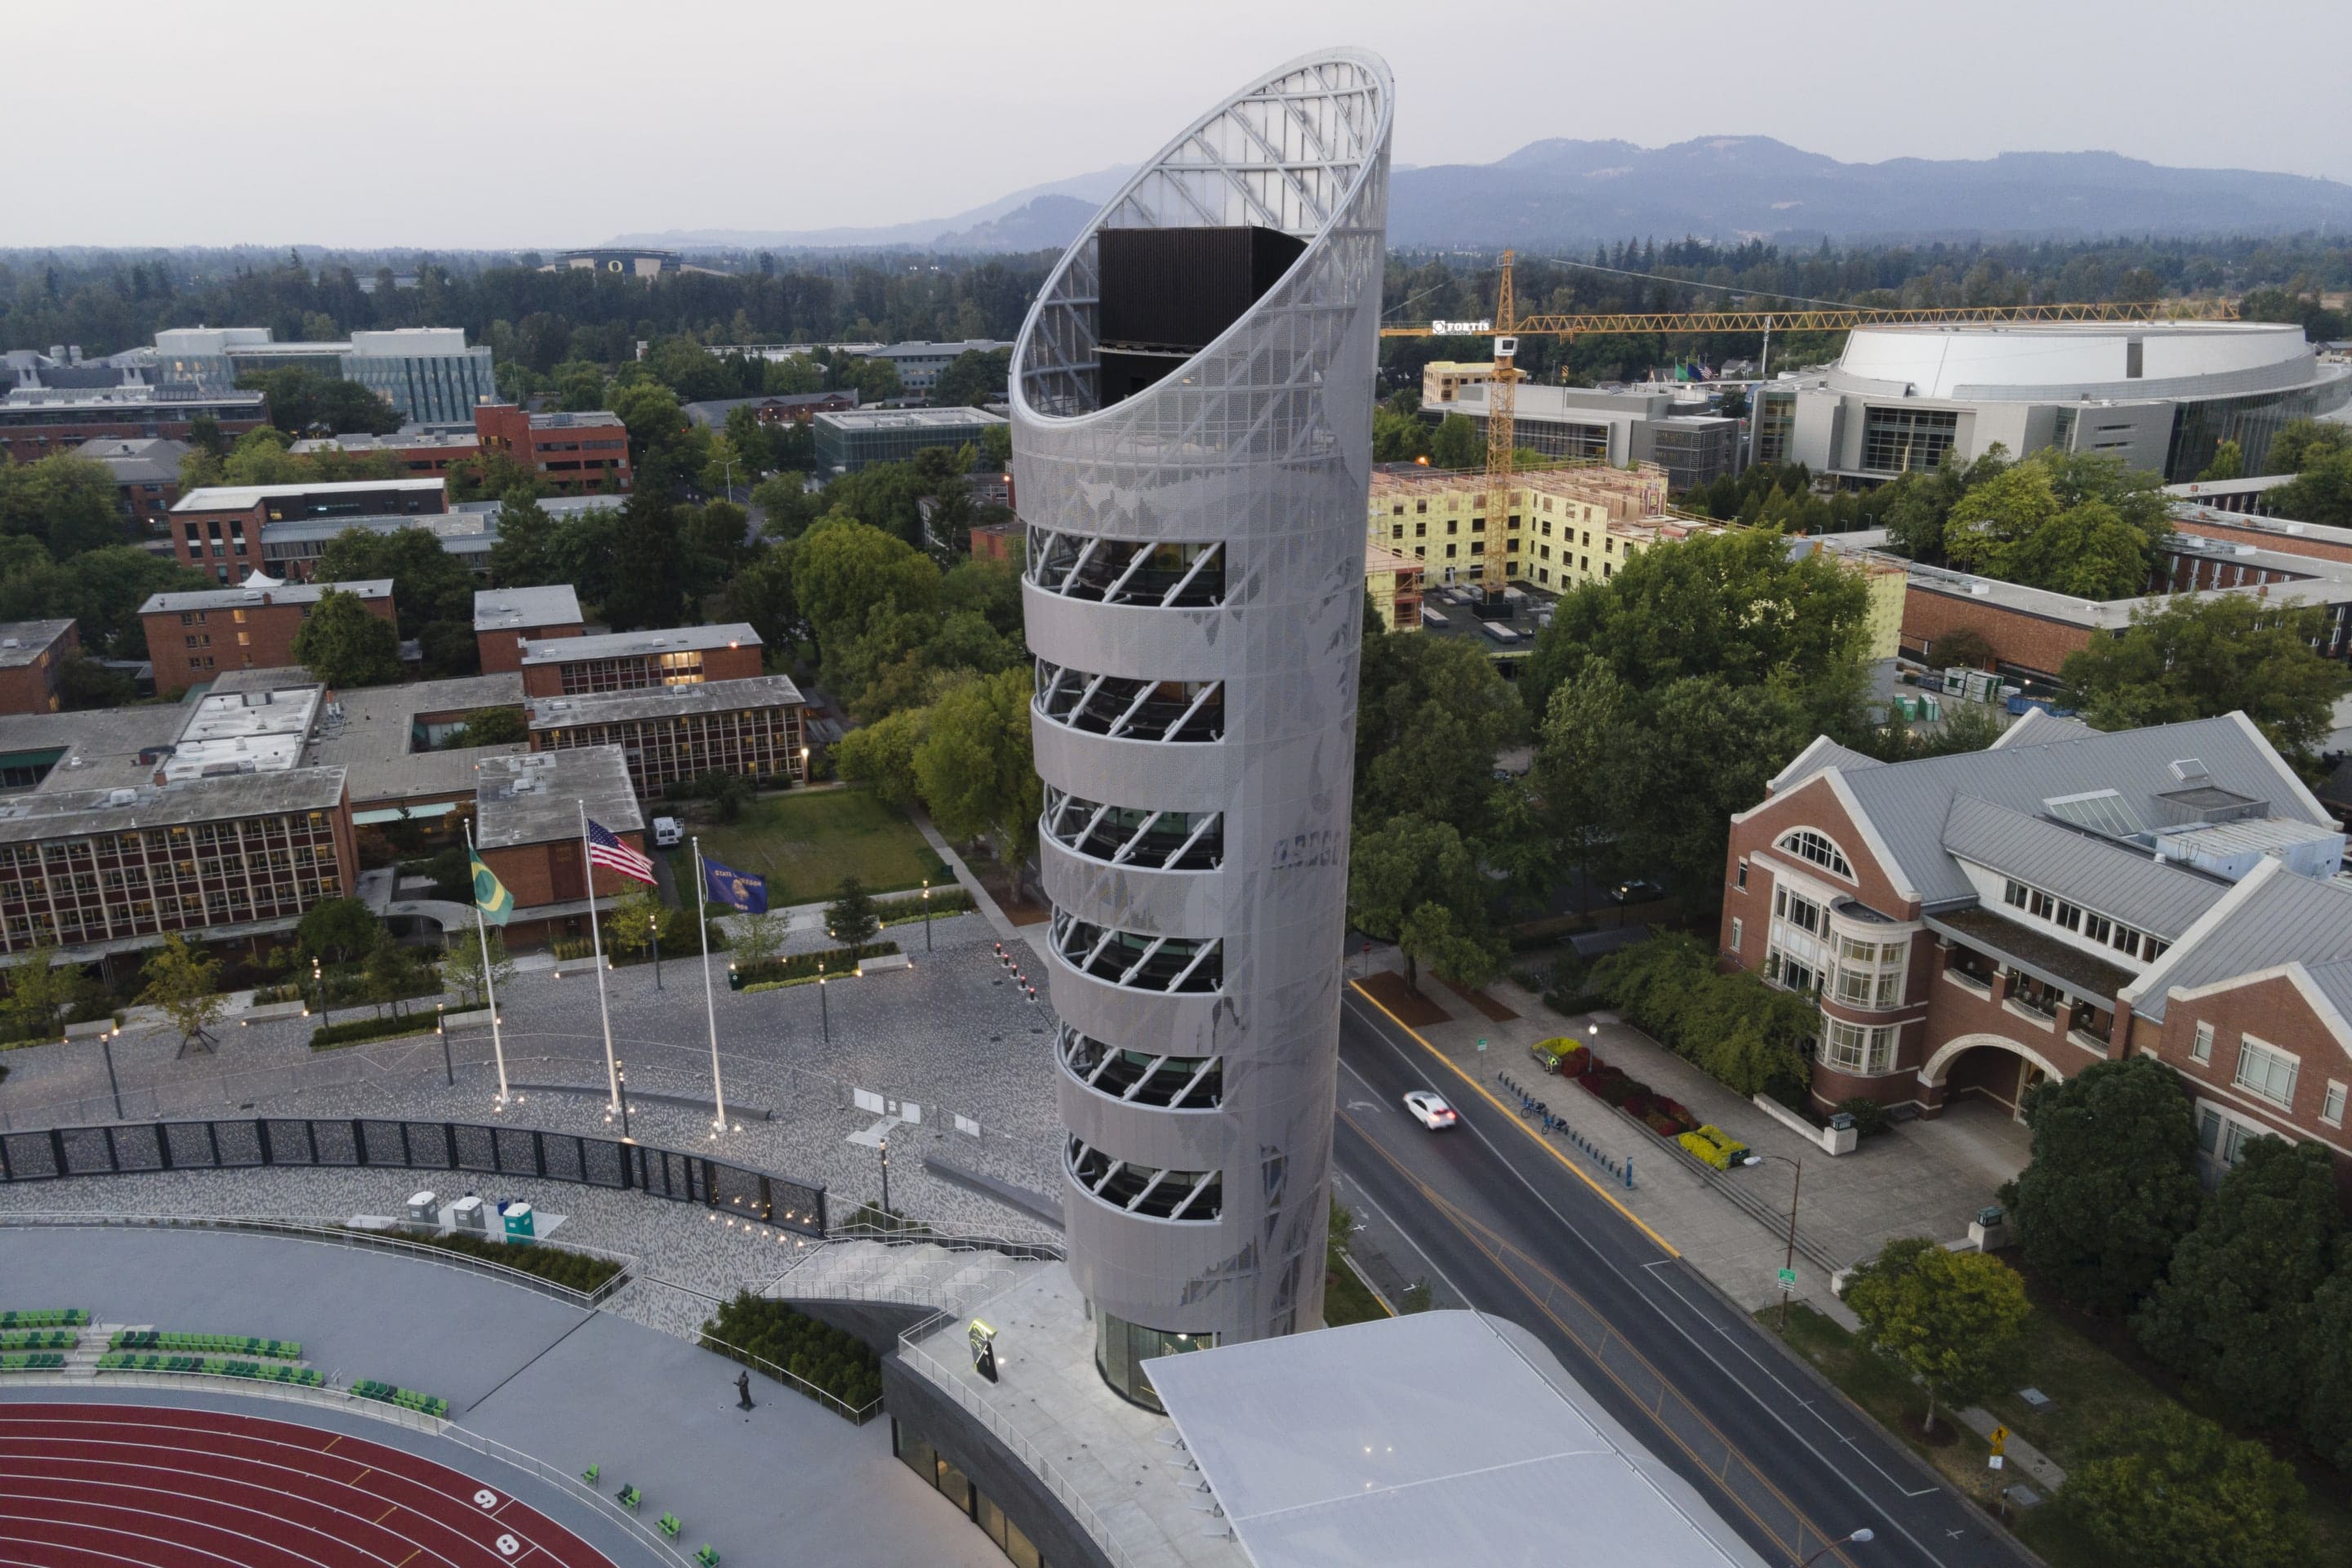 The 10-story Hayward Tower features an observation deck and multiple viewing areas.